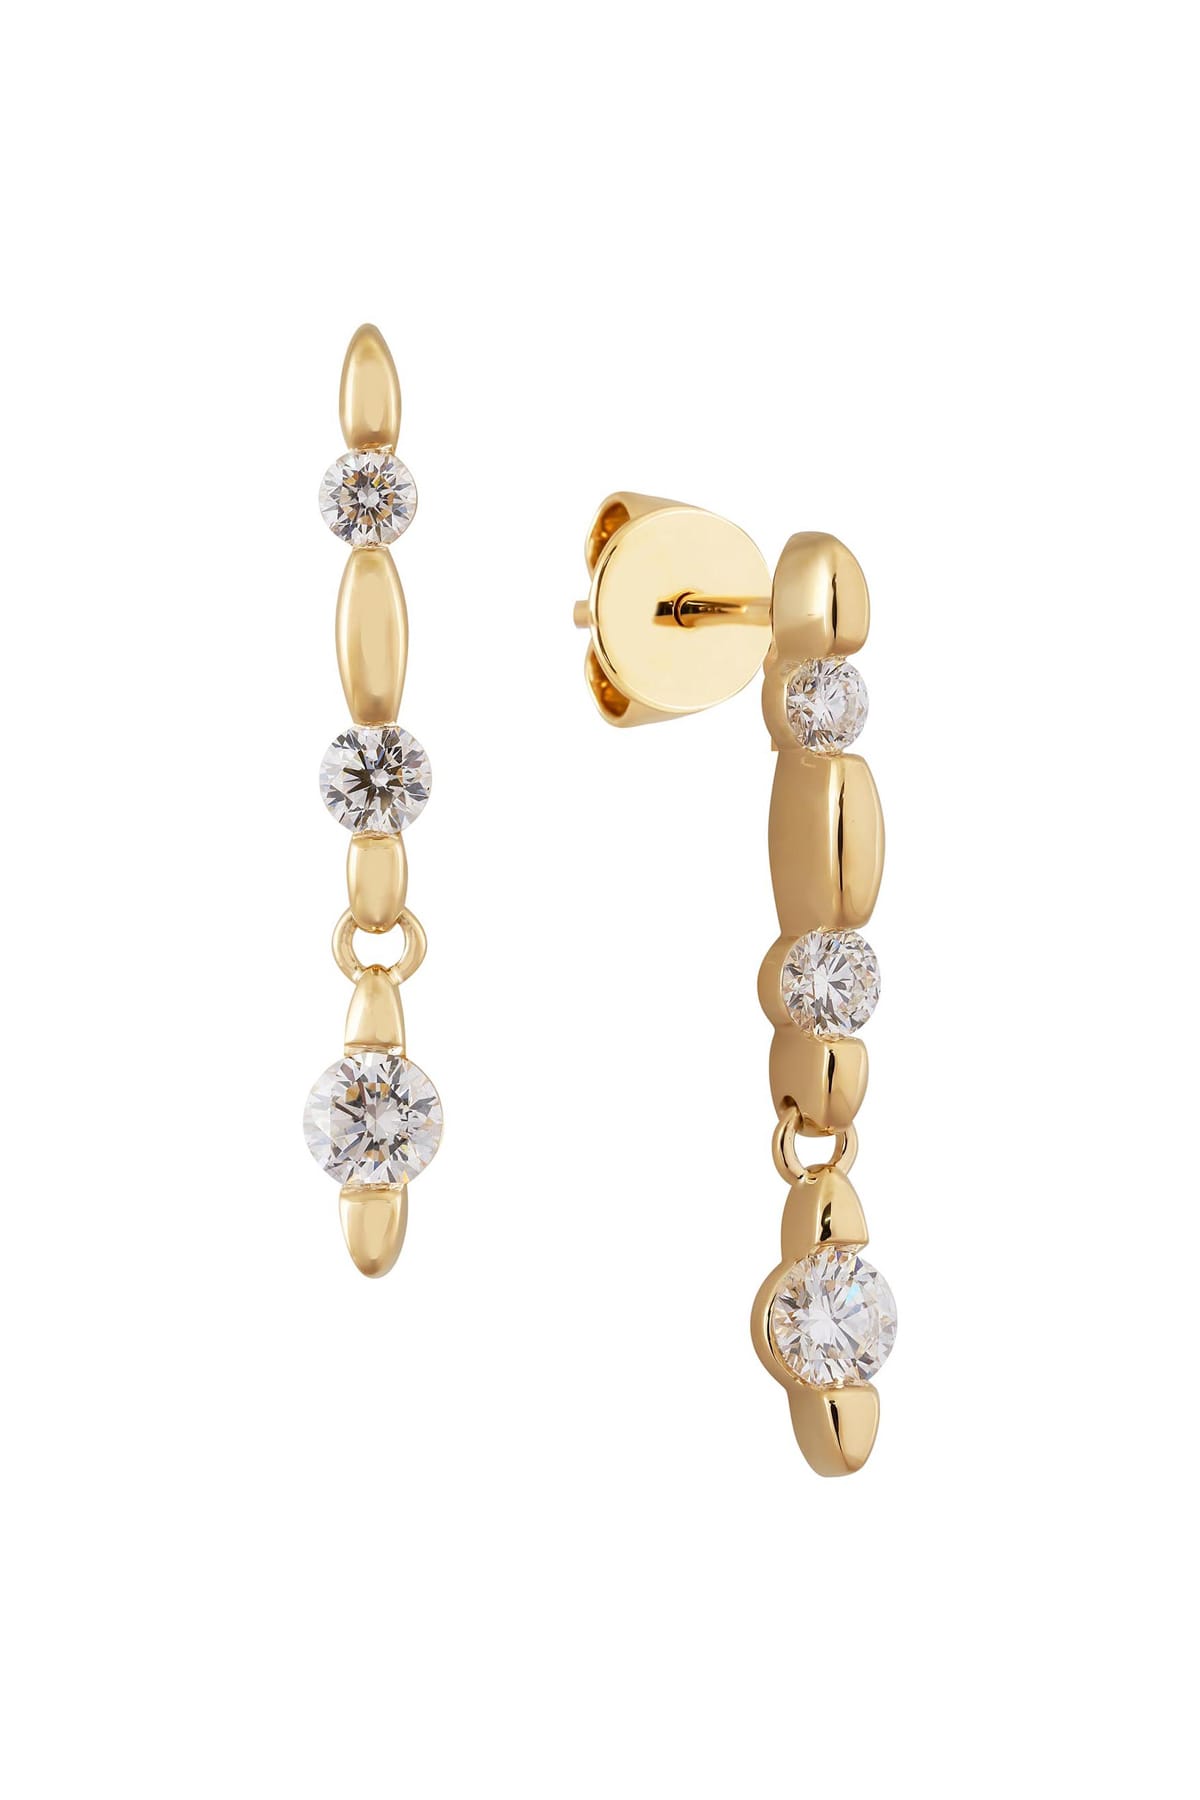 Diamond Set Drop Style Stud Earrings set in 18ct Yellow Gold available at LeGassick Diamonds and Jewellery Gold Coast, Australia.